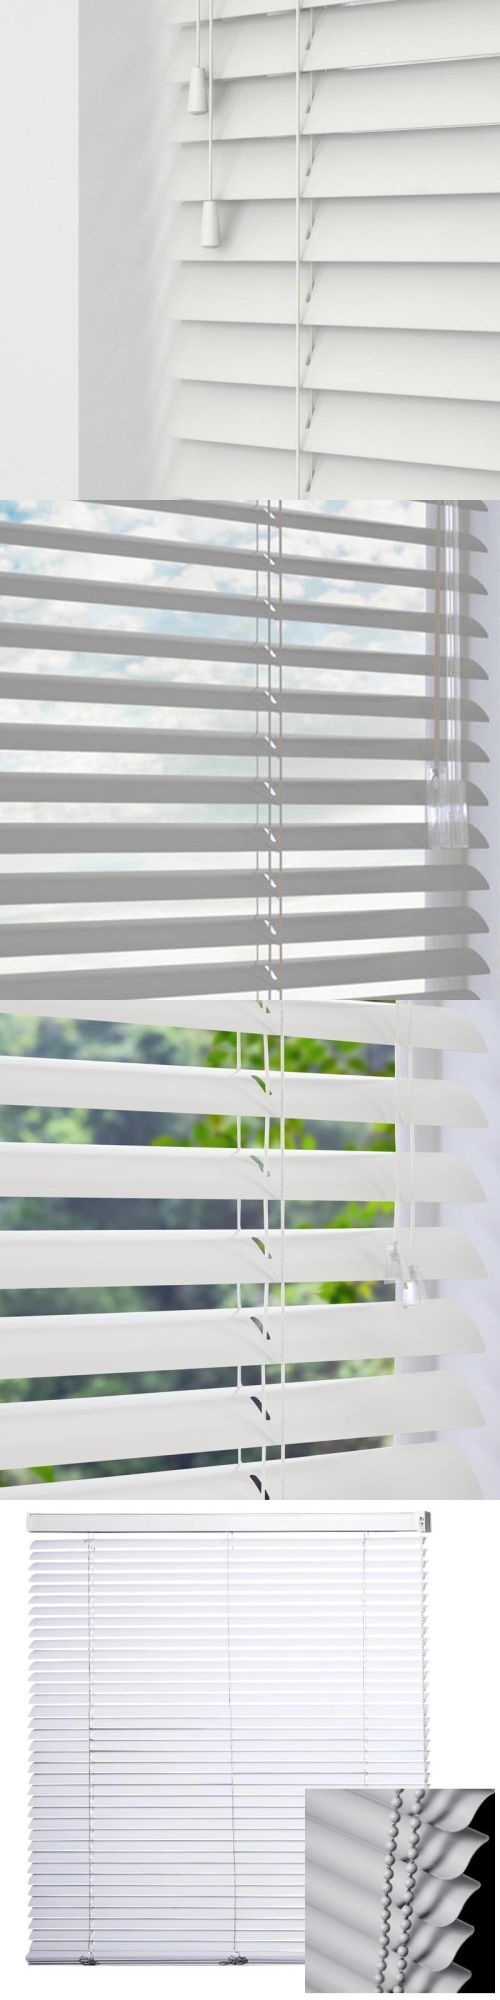 Office Window Curtains and Blinds Basswood Ladder String Wooden Blinds Slats Venetian Blinds